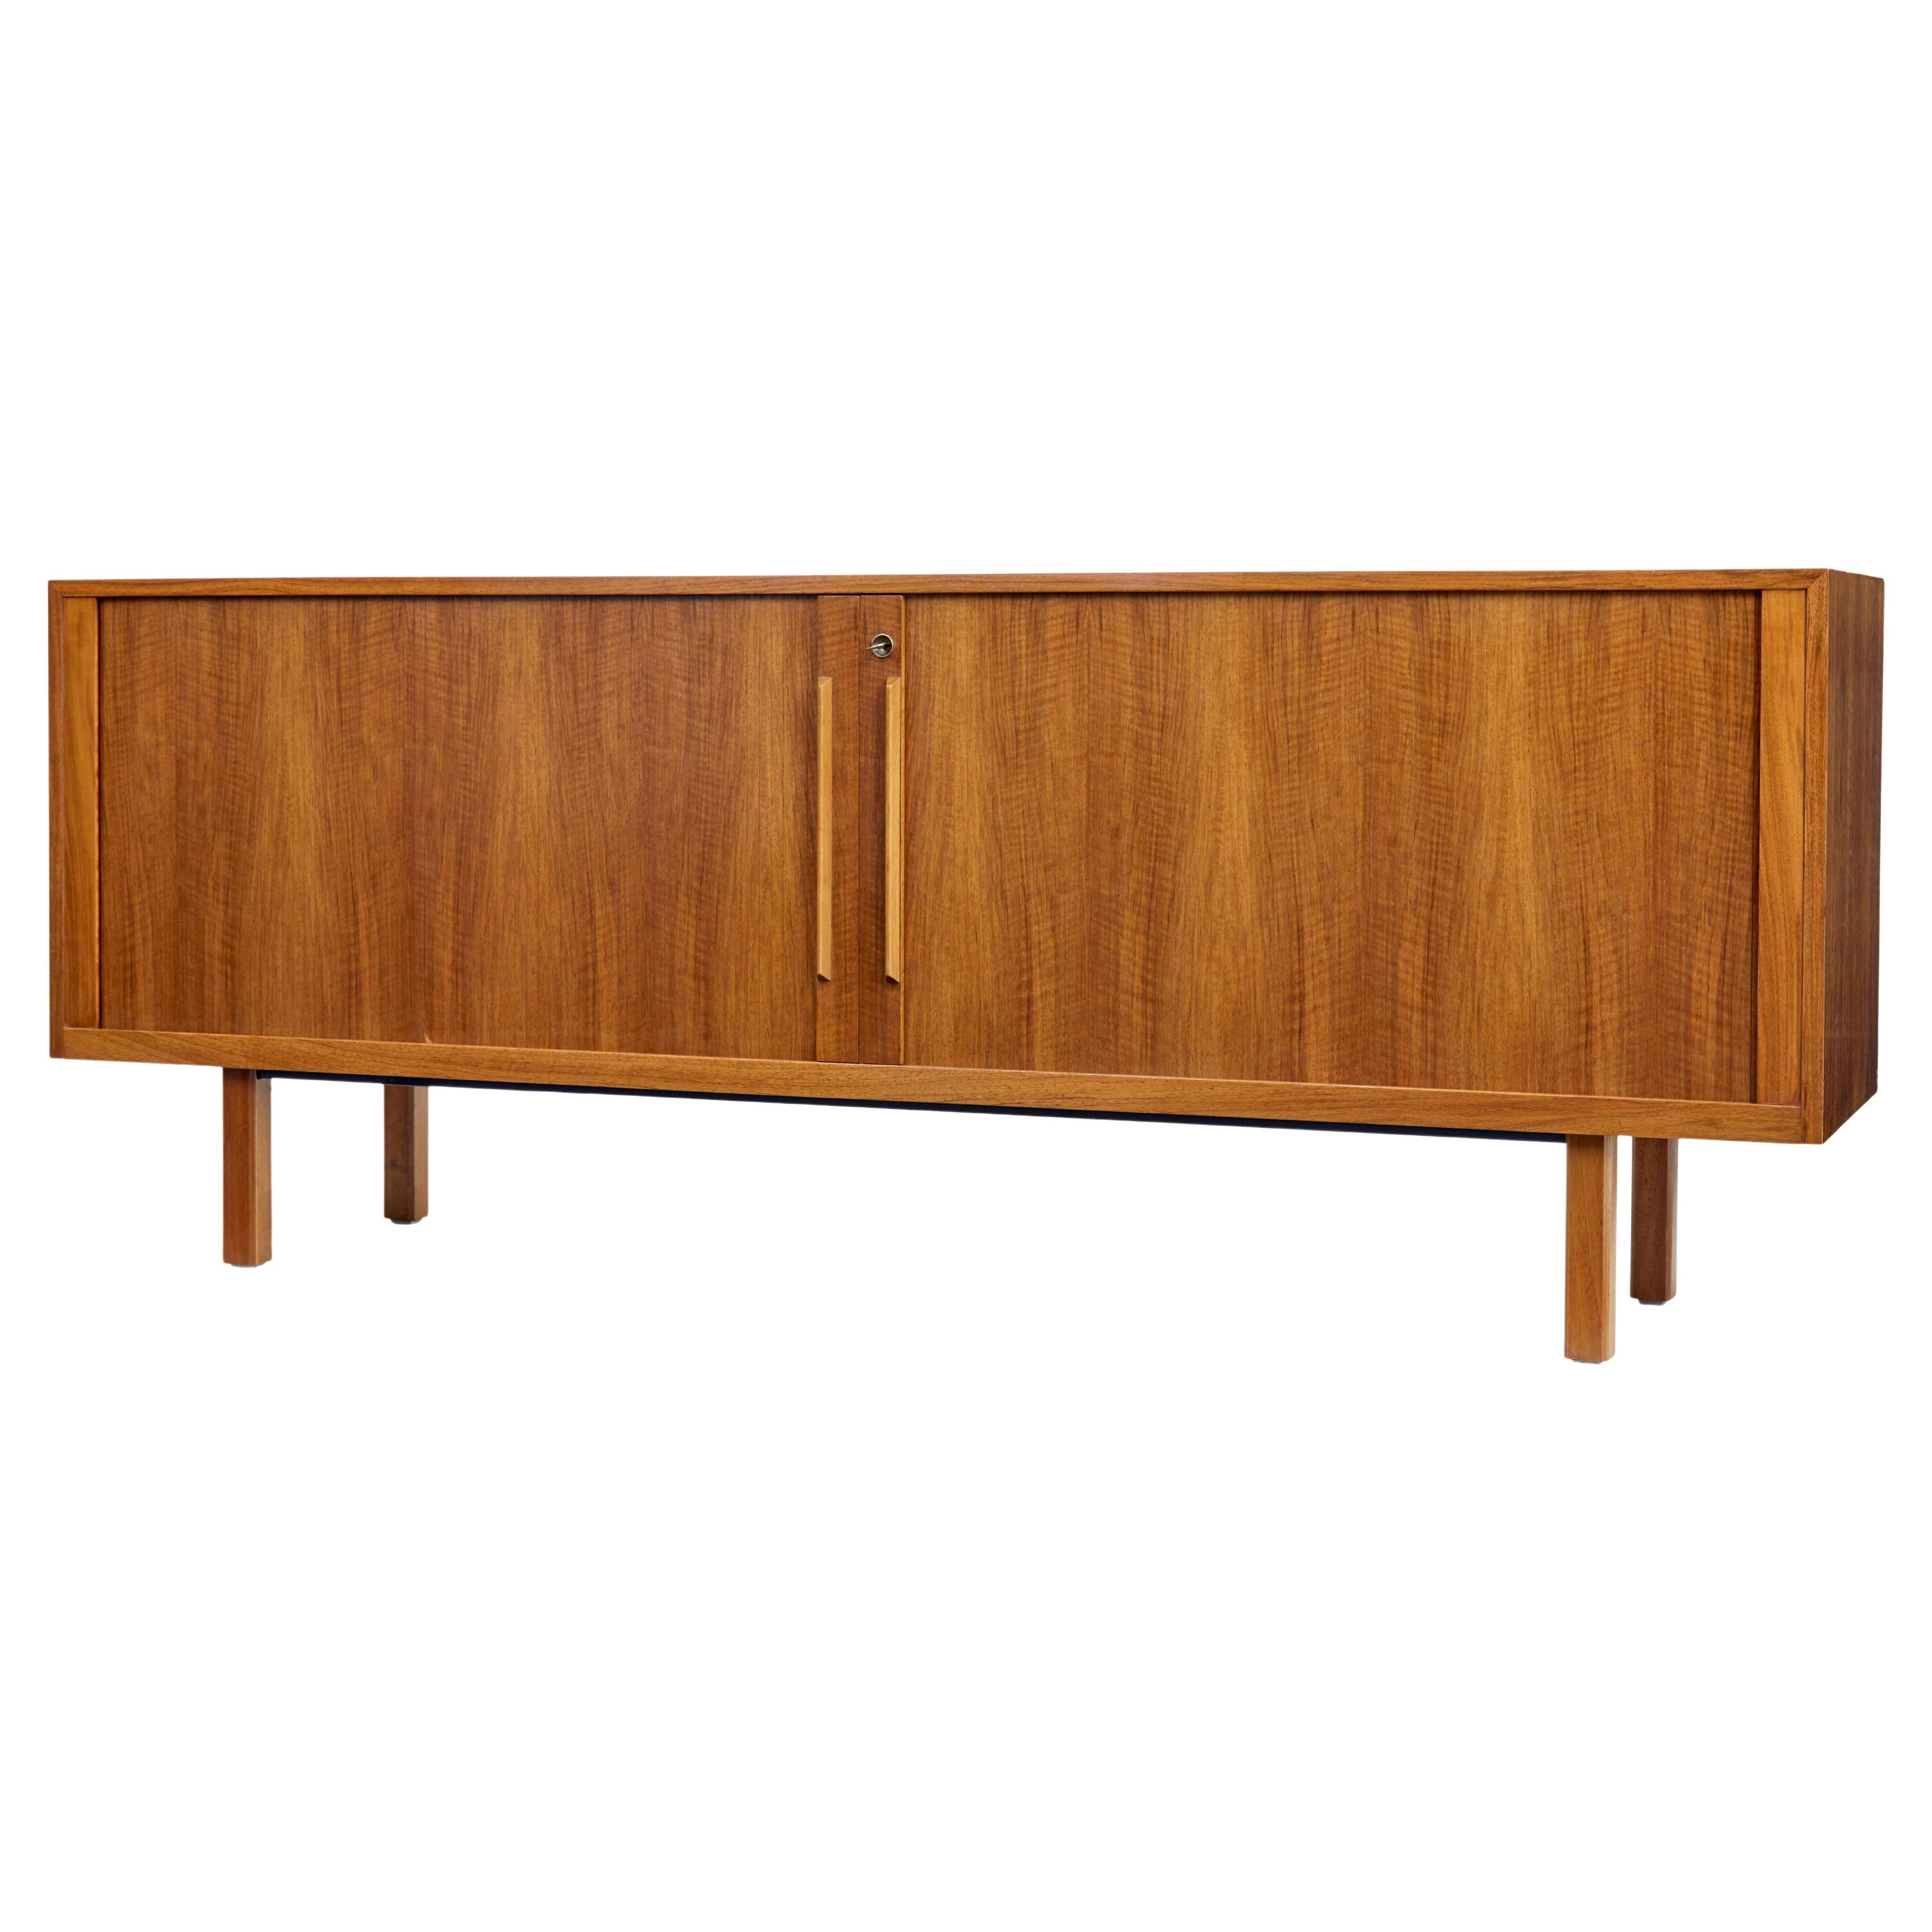 20th century Swedish teak tambour front sideboard by Atvidabergs